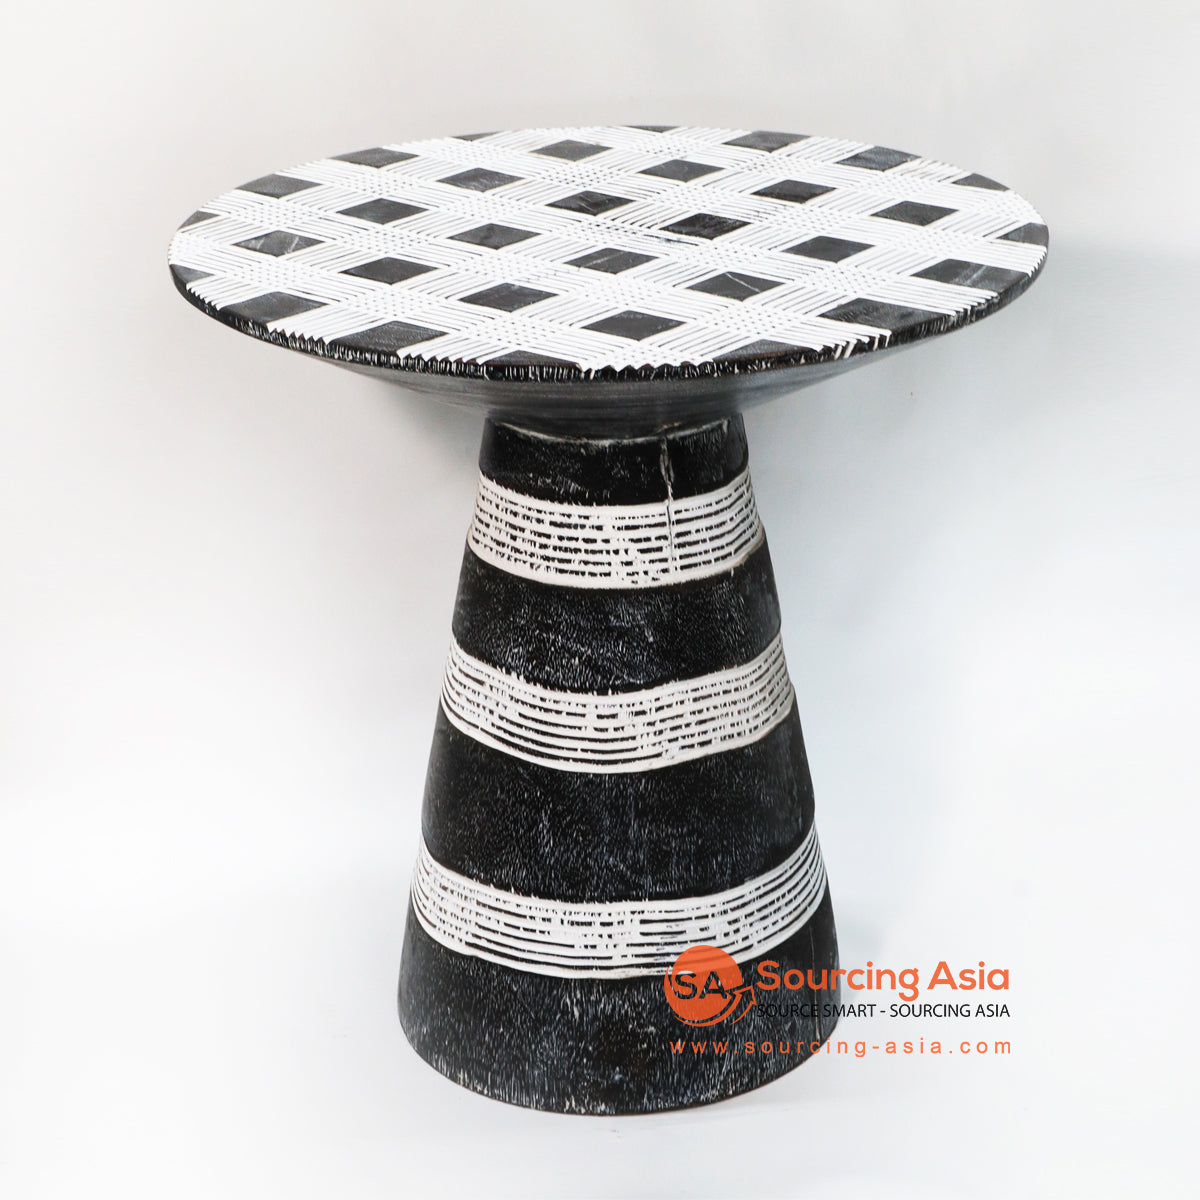 BMW220-2 BLACK AND WHITE SUAR WOOD ETHNIC TRIBAL STYLE SIDE TABLE